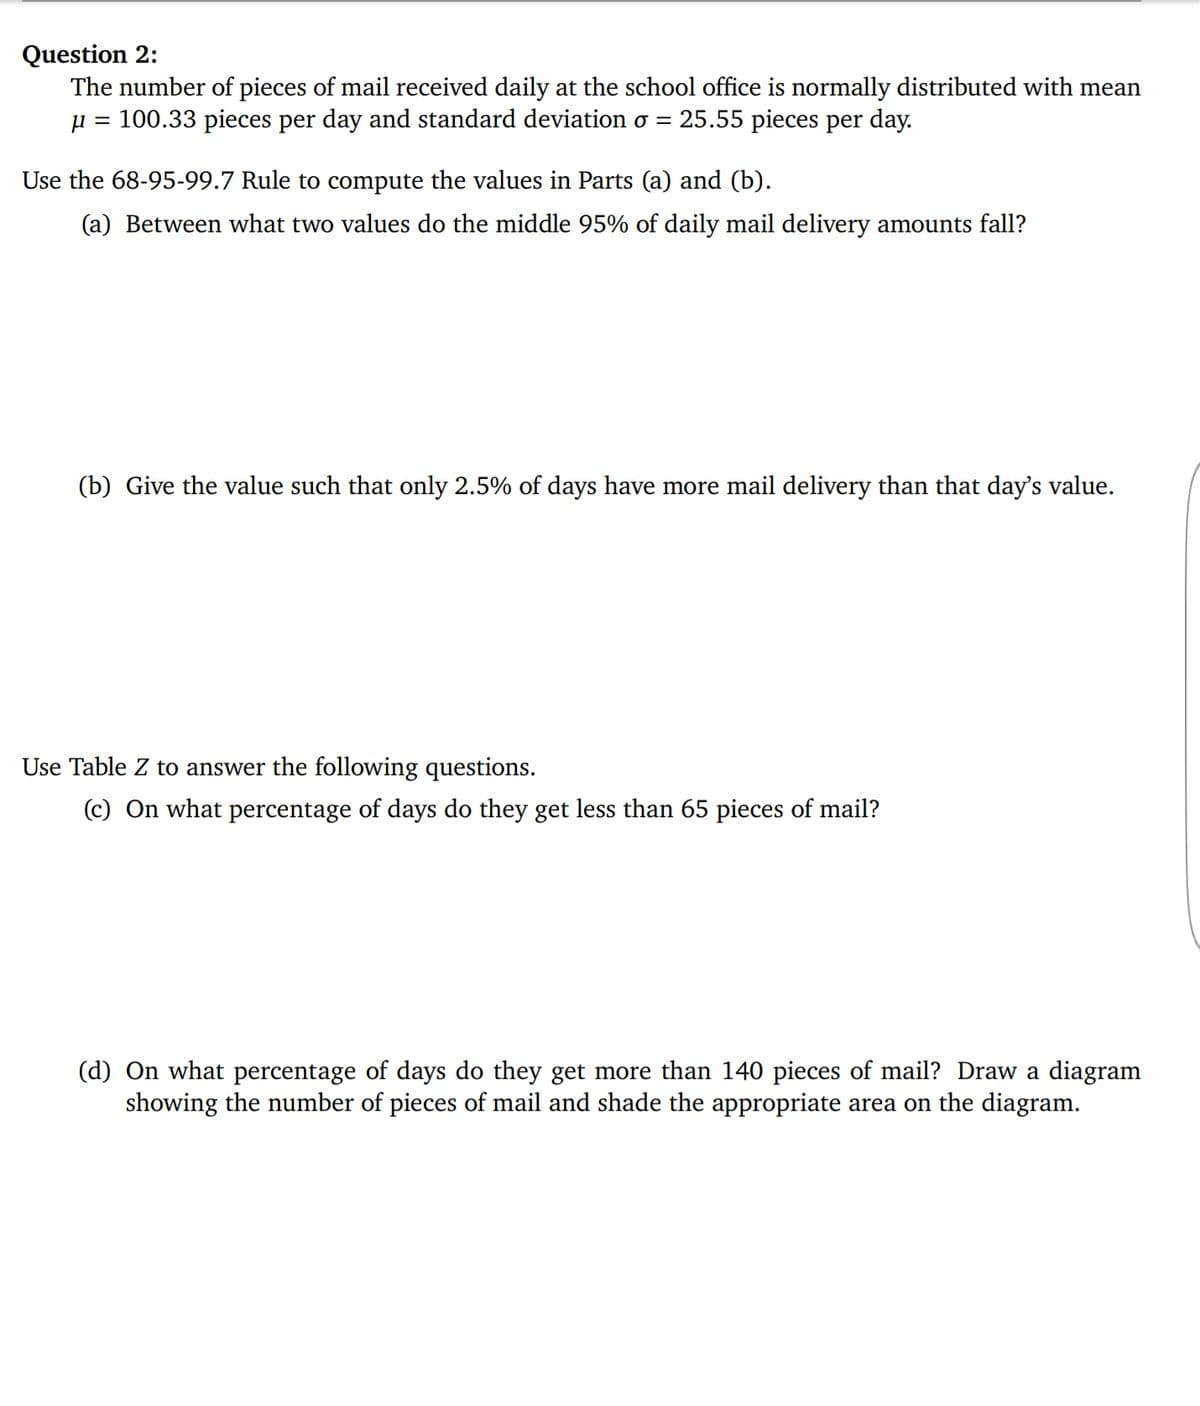 Question 2:
The number of pieces of mail received daily at the school office is normally distributed with mean
= 100.33 pieces per day and standard deviation o =
25.55 pieces per day.
Use the 68-95-99.7 Rule to compute the values in Parts (a) and (b).
(a) Between what two values do the middle 95% of daily mail delivery amounts fall?
(b) Give the value such that only 2.5% of days have more mail delivery than that day's value.
Use Table Z to answer the following questions.
(c) On what percentage of days do they get less than 65 pieces of mail?
(d) On what percentage of days do they get more than 140 pieces of mail? Draw a diagram
showing the number of pieces of mail and shade the appropriate area on the diagram.
